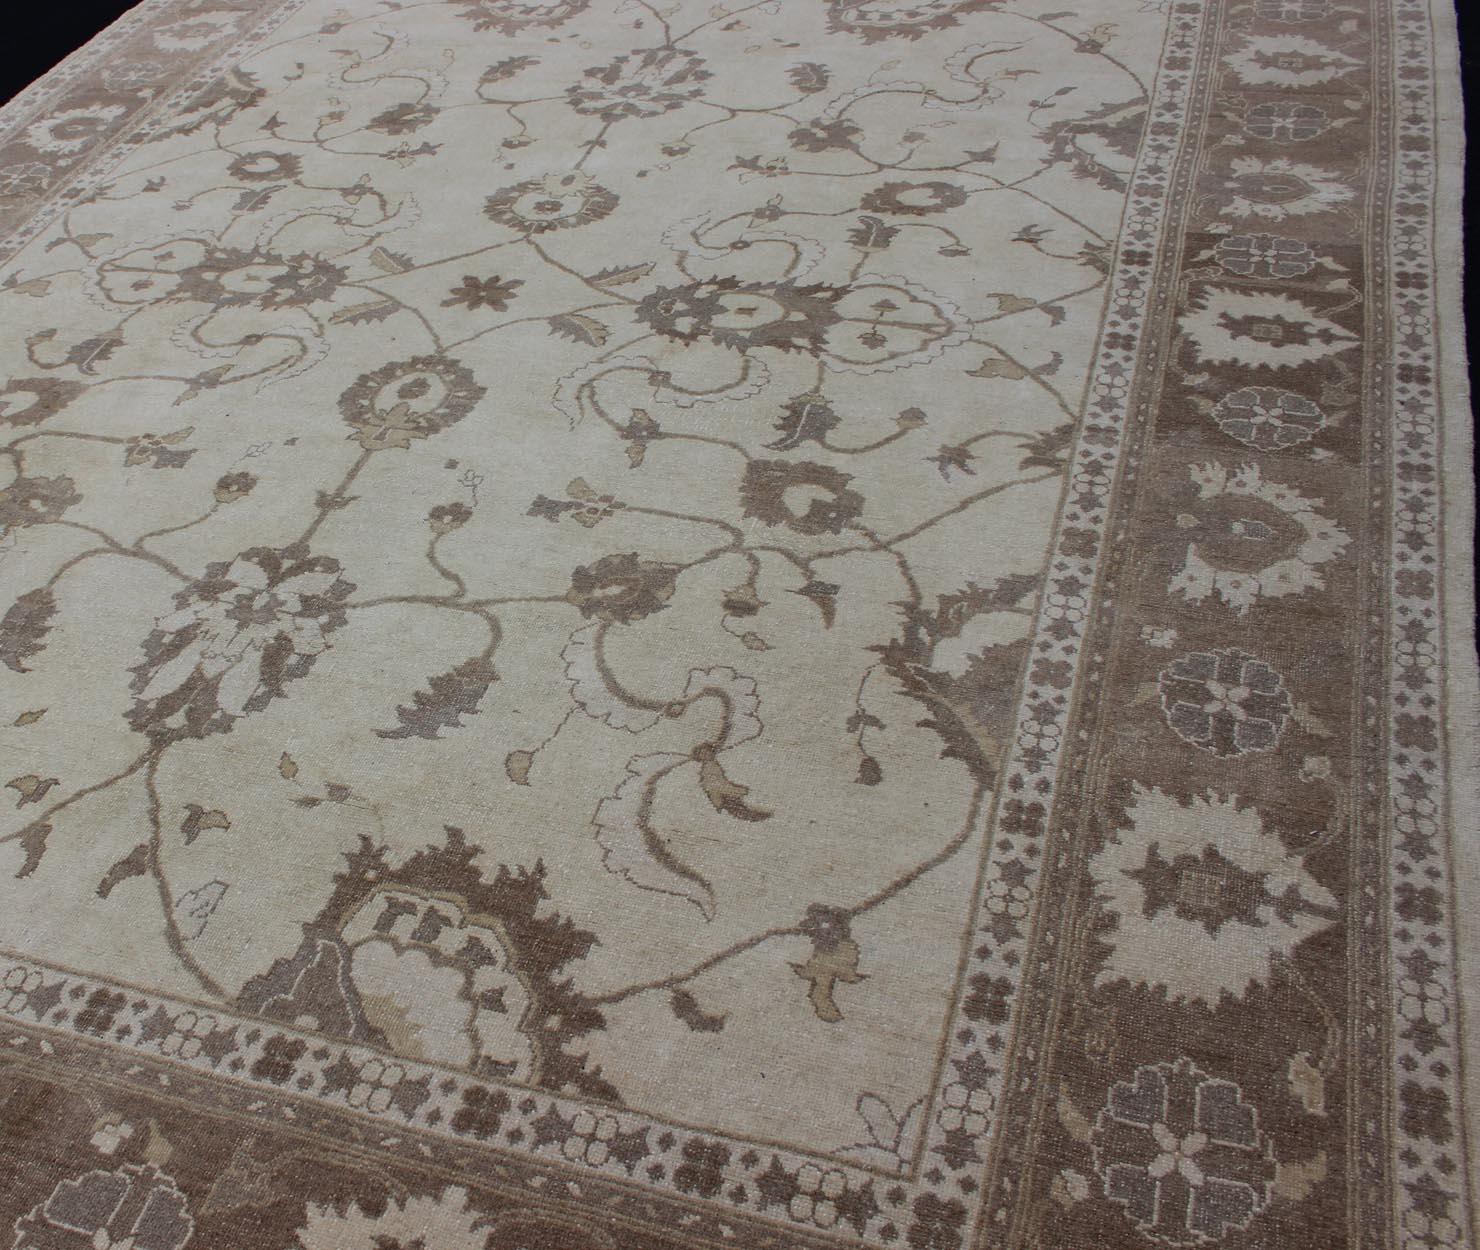 Earth Tone Afghan Oushak Rug in Brown and Cream In Good Condition For Sale In Atlanta, GA